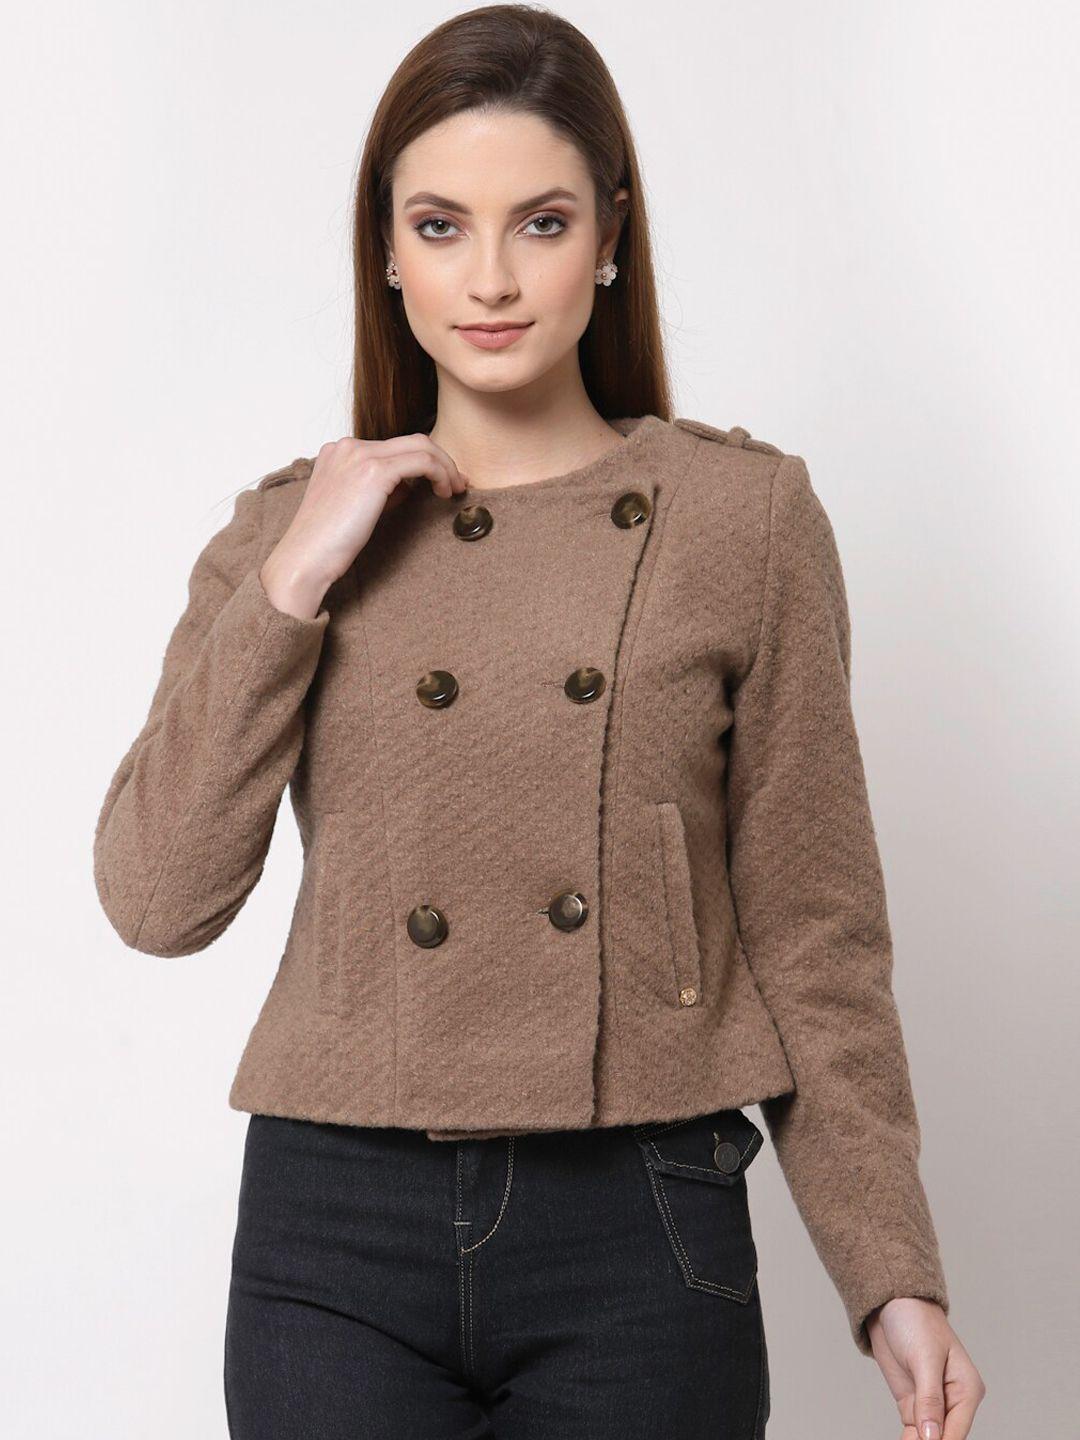 juelle women double-breasted pea coat